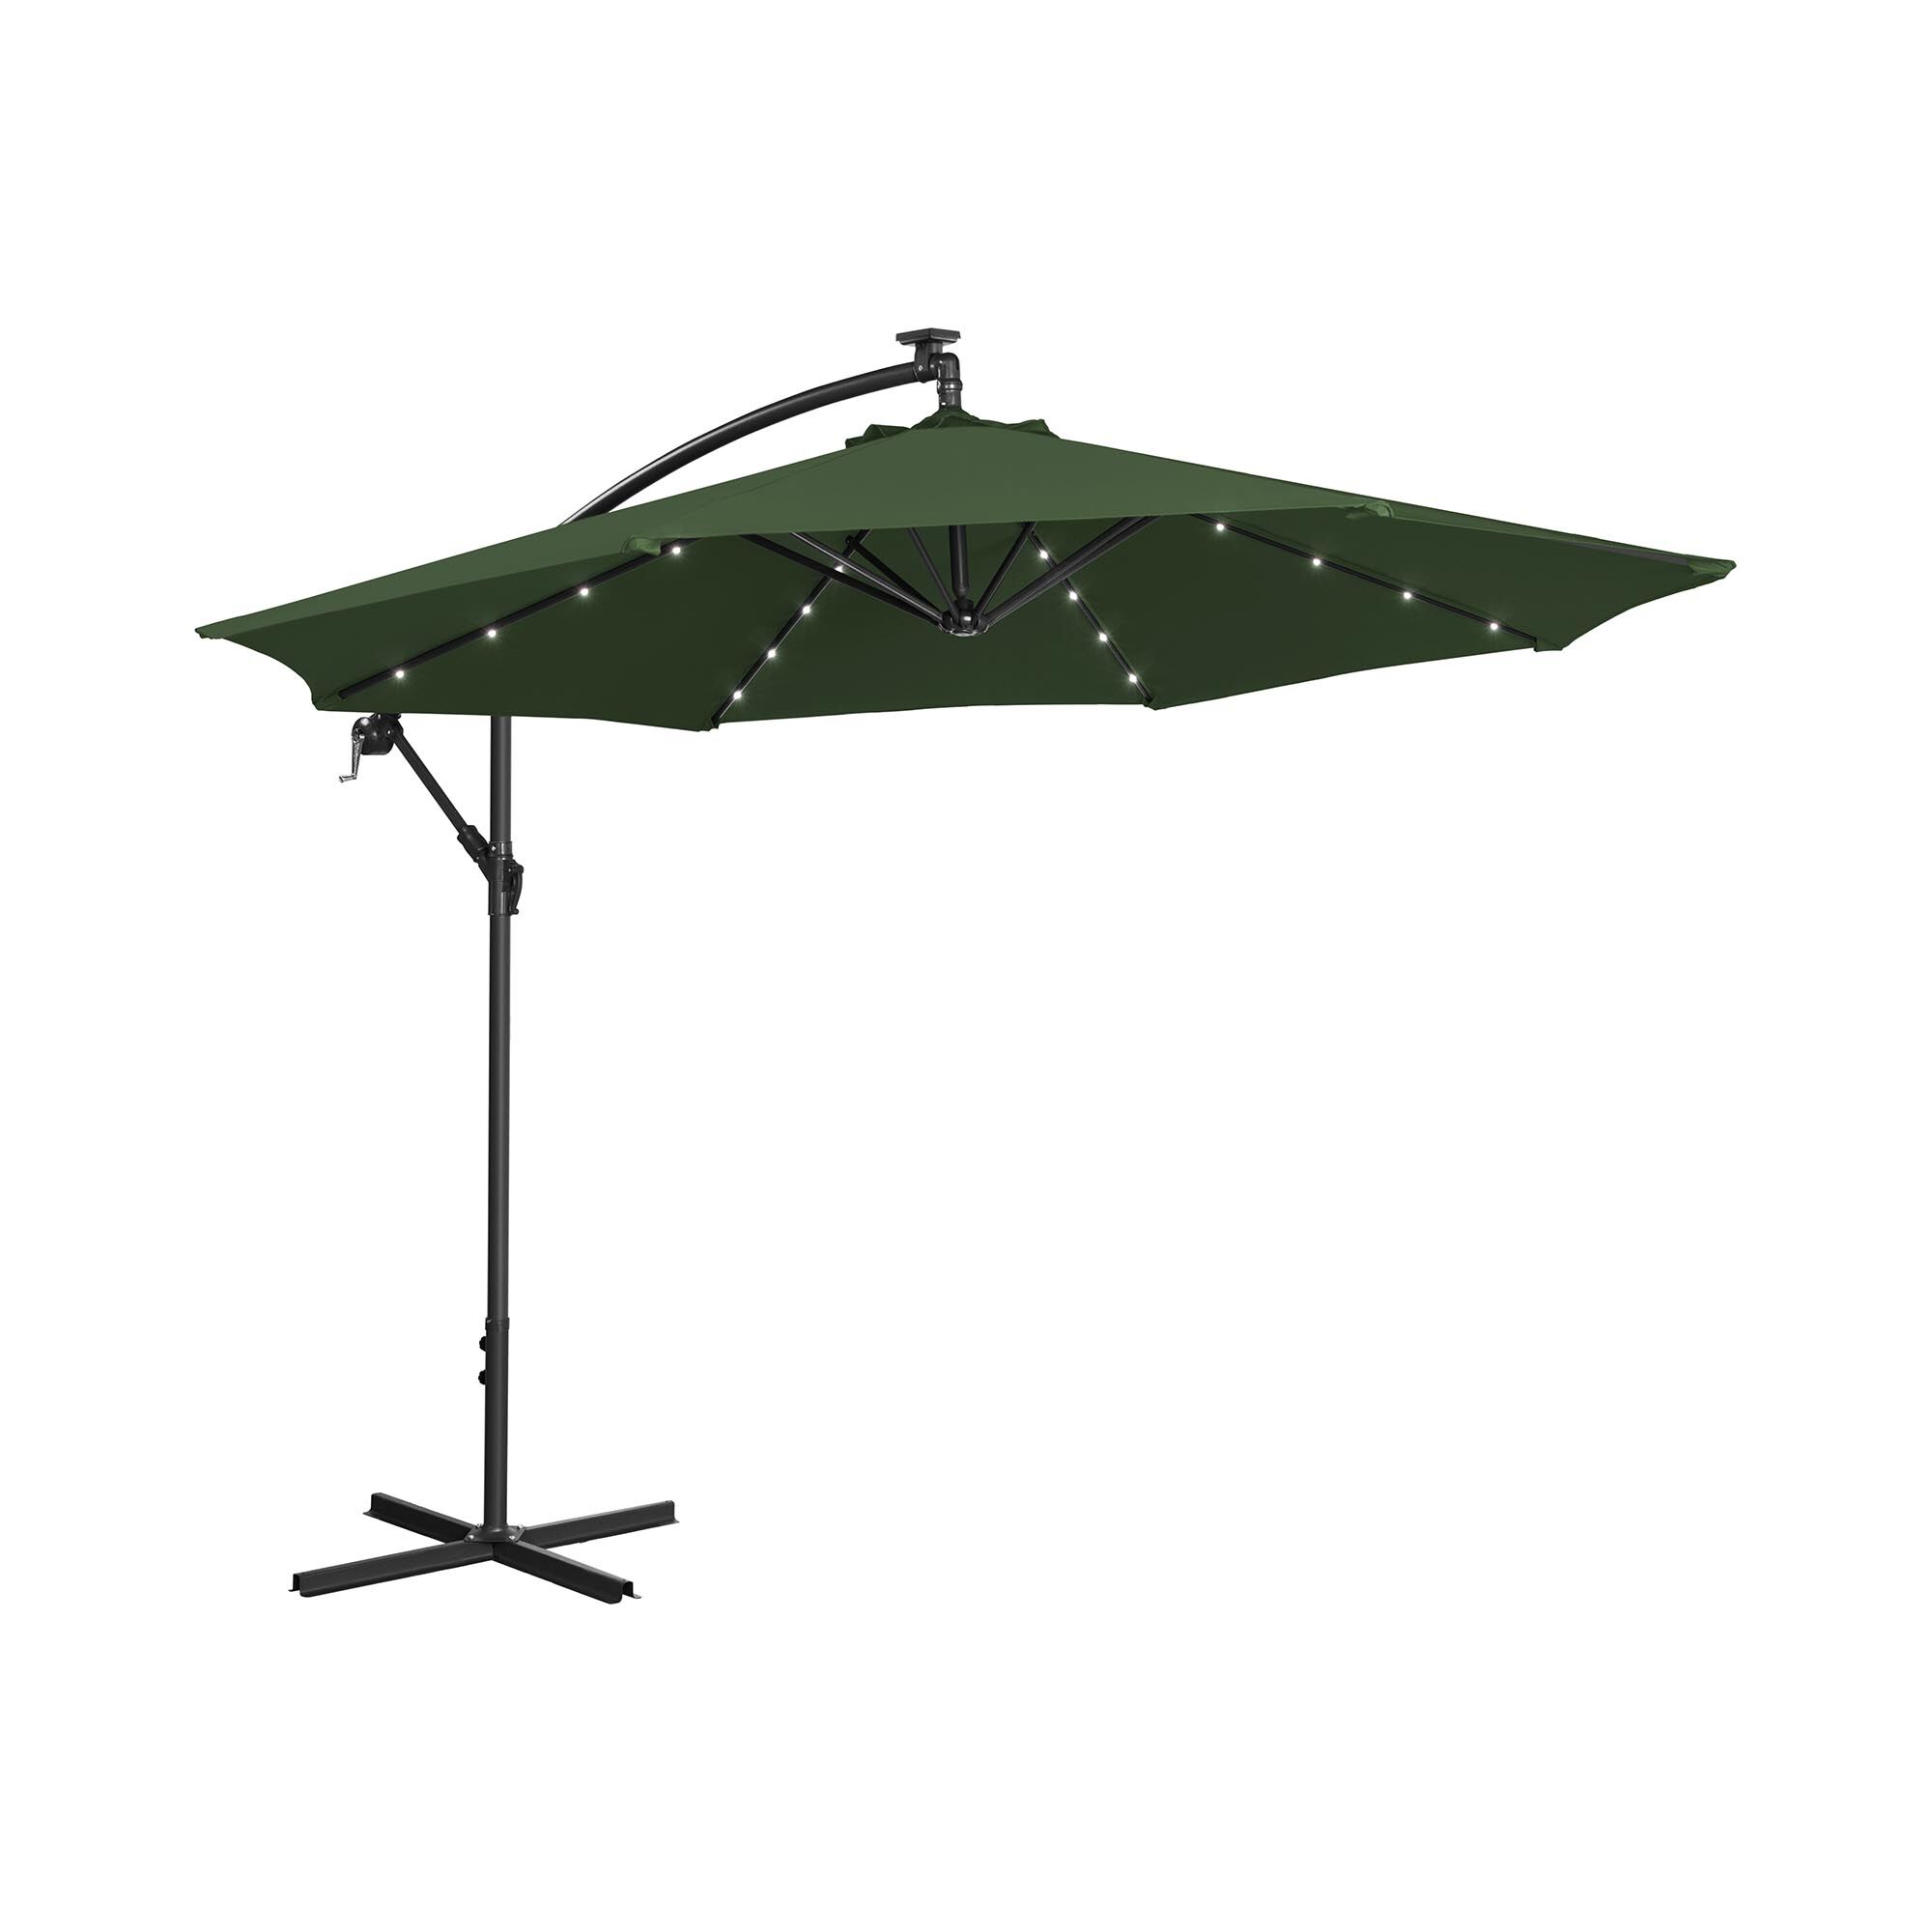 Uniprodo Hanging Parasol with Lights - green - round - Ø 300 cm - tiltable